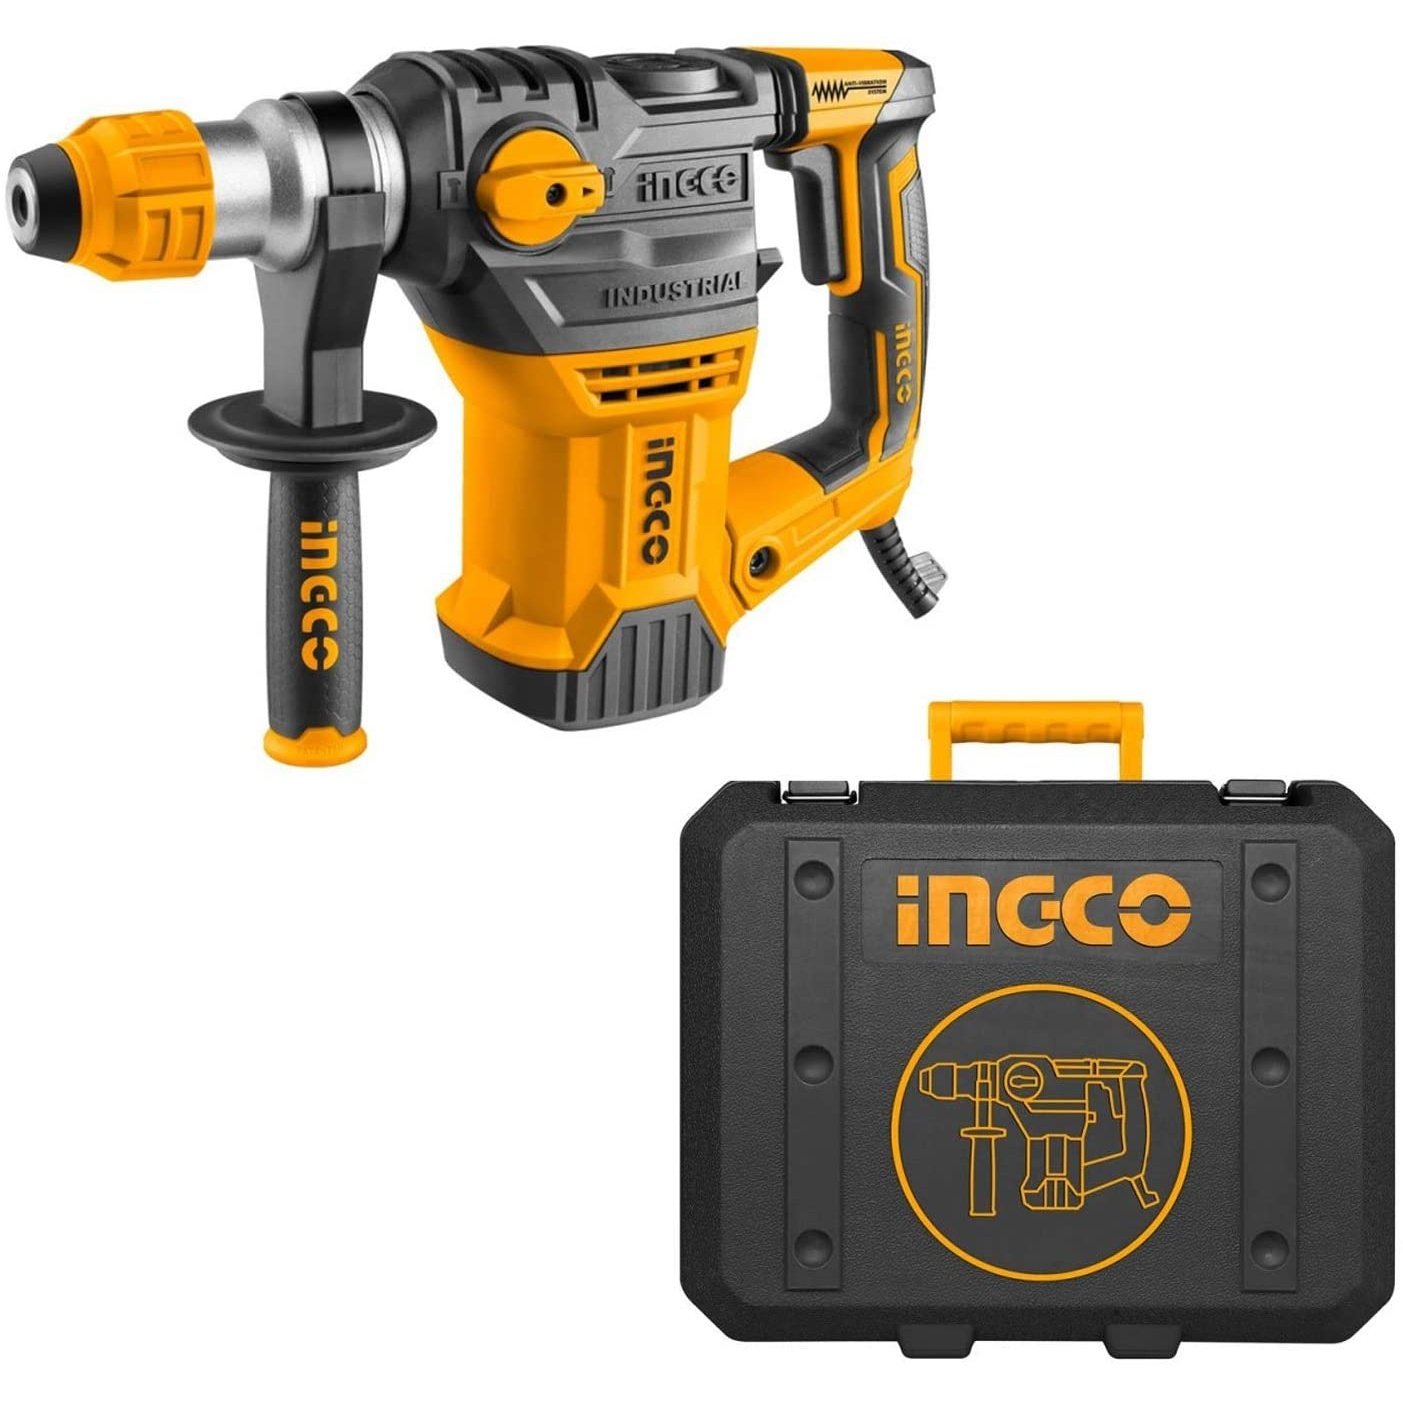 Ingco Heavy Duty Rotary Hammer Drill with SDS plus 1500W - RH150028 | Supply Master | Accra, Ghana Tools Building Steel Engineering Hardware tool